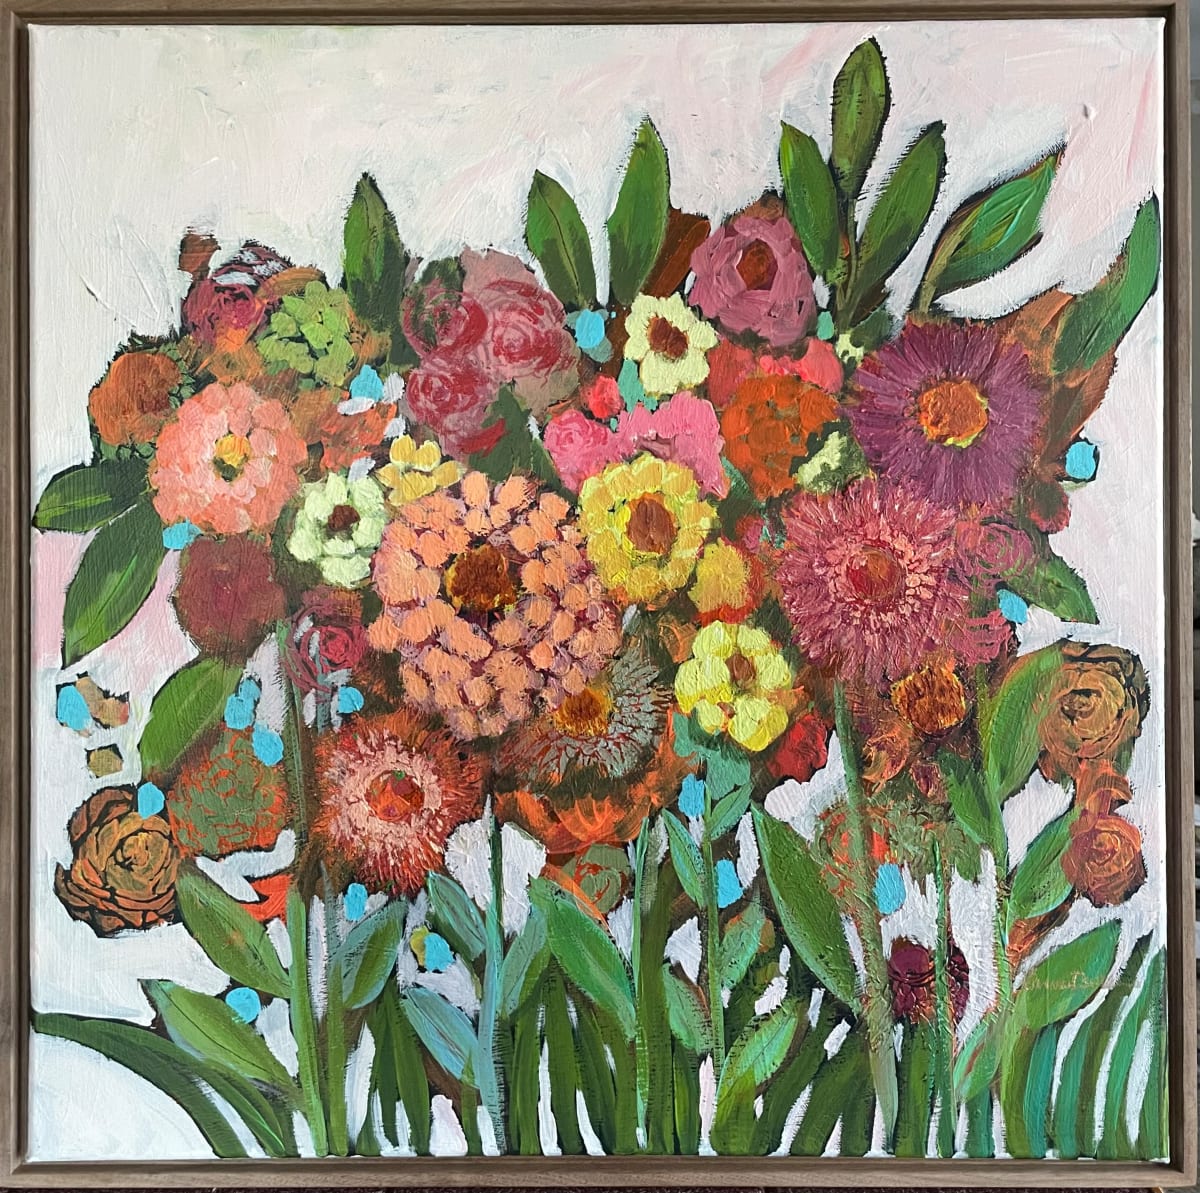 Weekend Getaway by Carmen Duran  Image: Acrylic floral painting  with glass beads. 
24x24 inch canvas, floater frame in walnut wood. Total 25x25x1.5 inches  